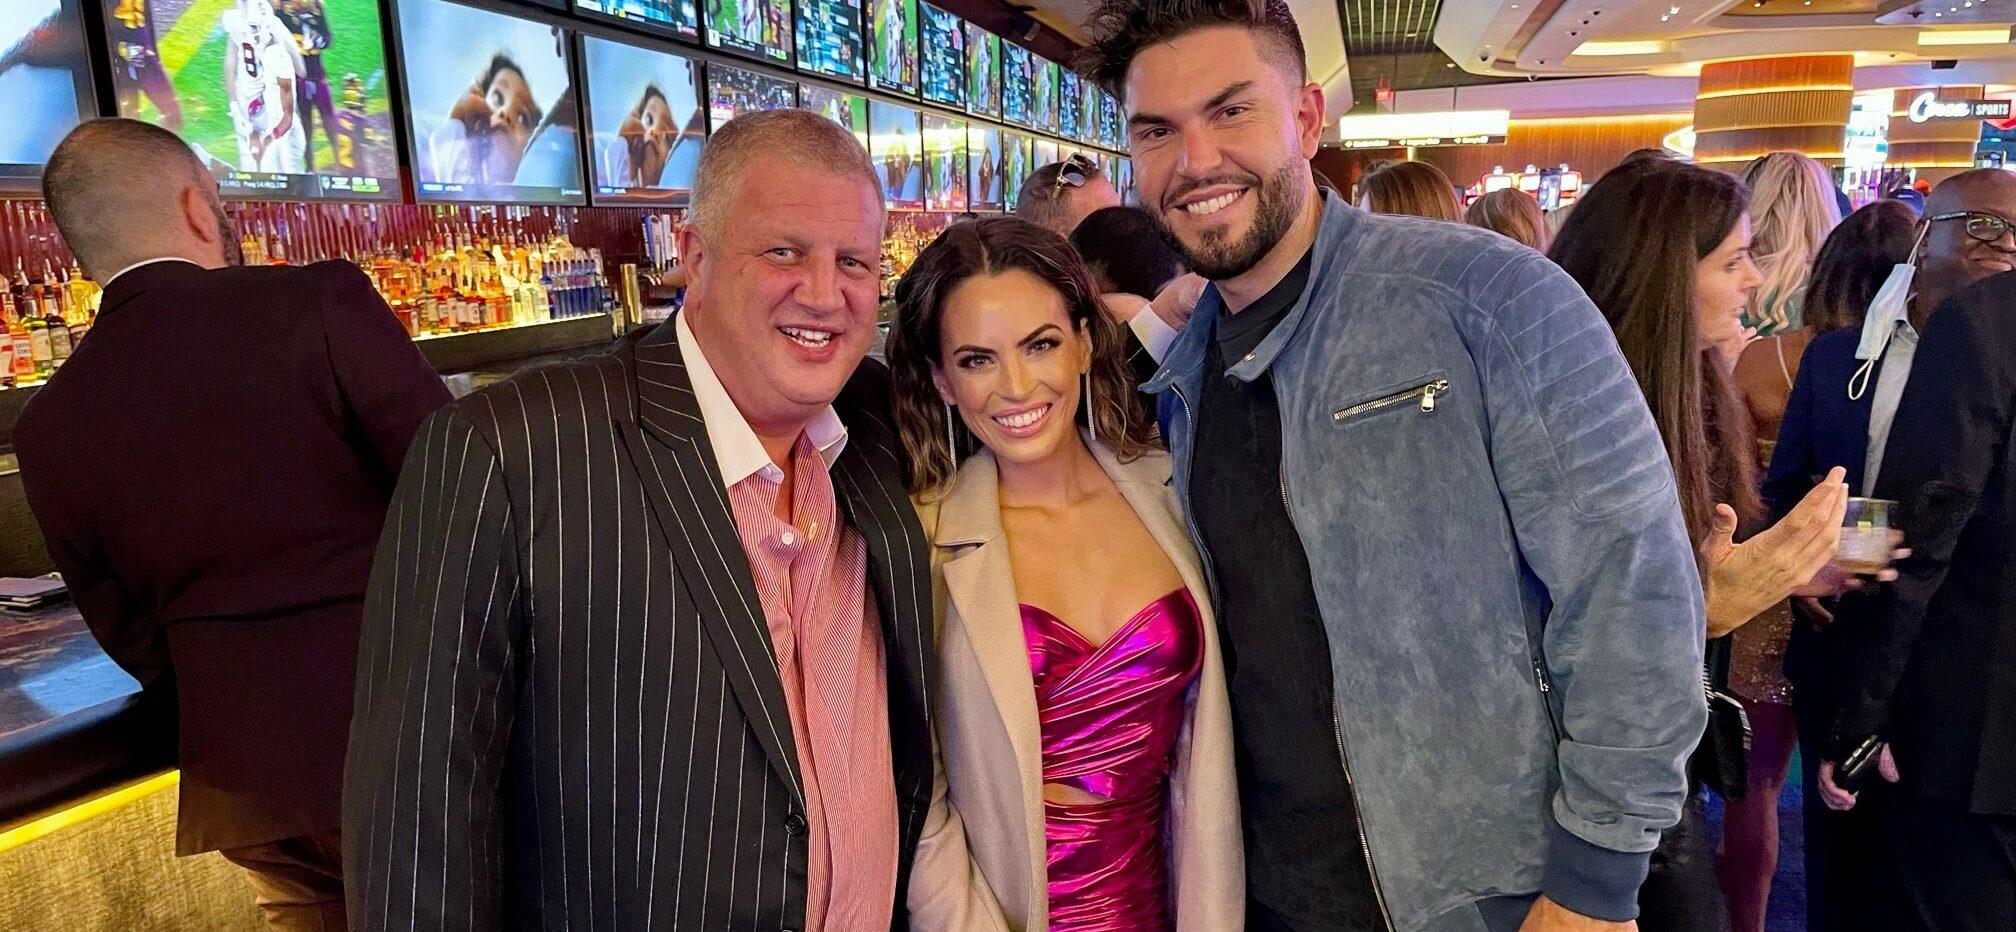 ‘MLB’ Star Eric Hosmer Slides Into Downtown Las Vegas For Amazing Weekend!